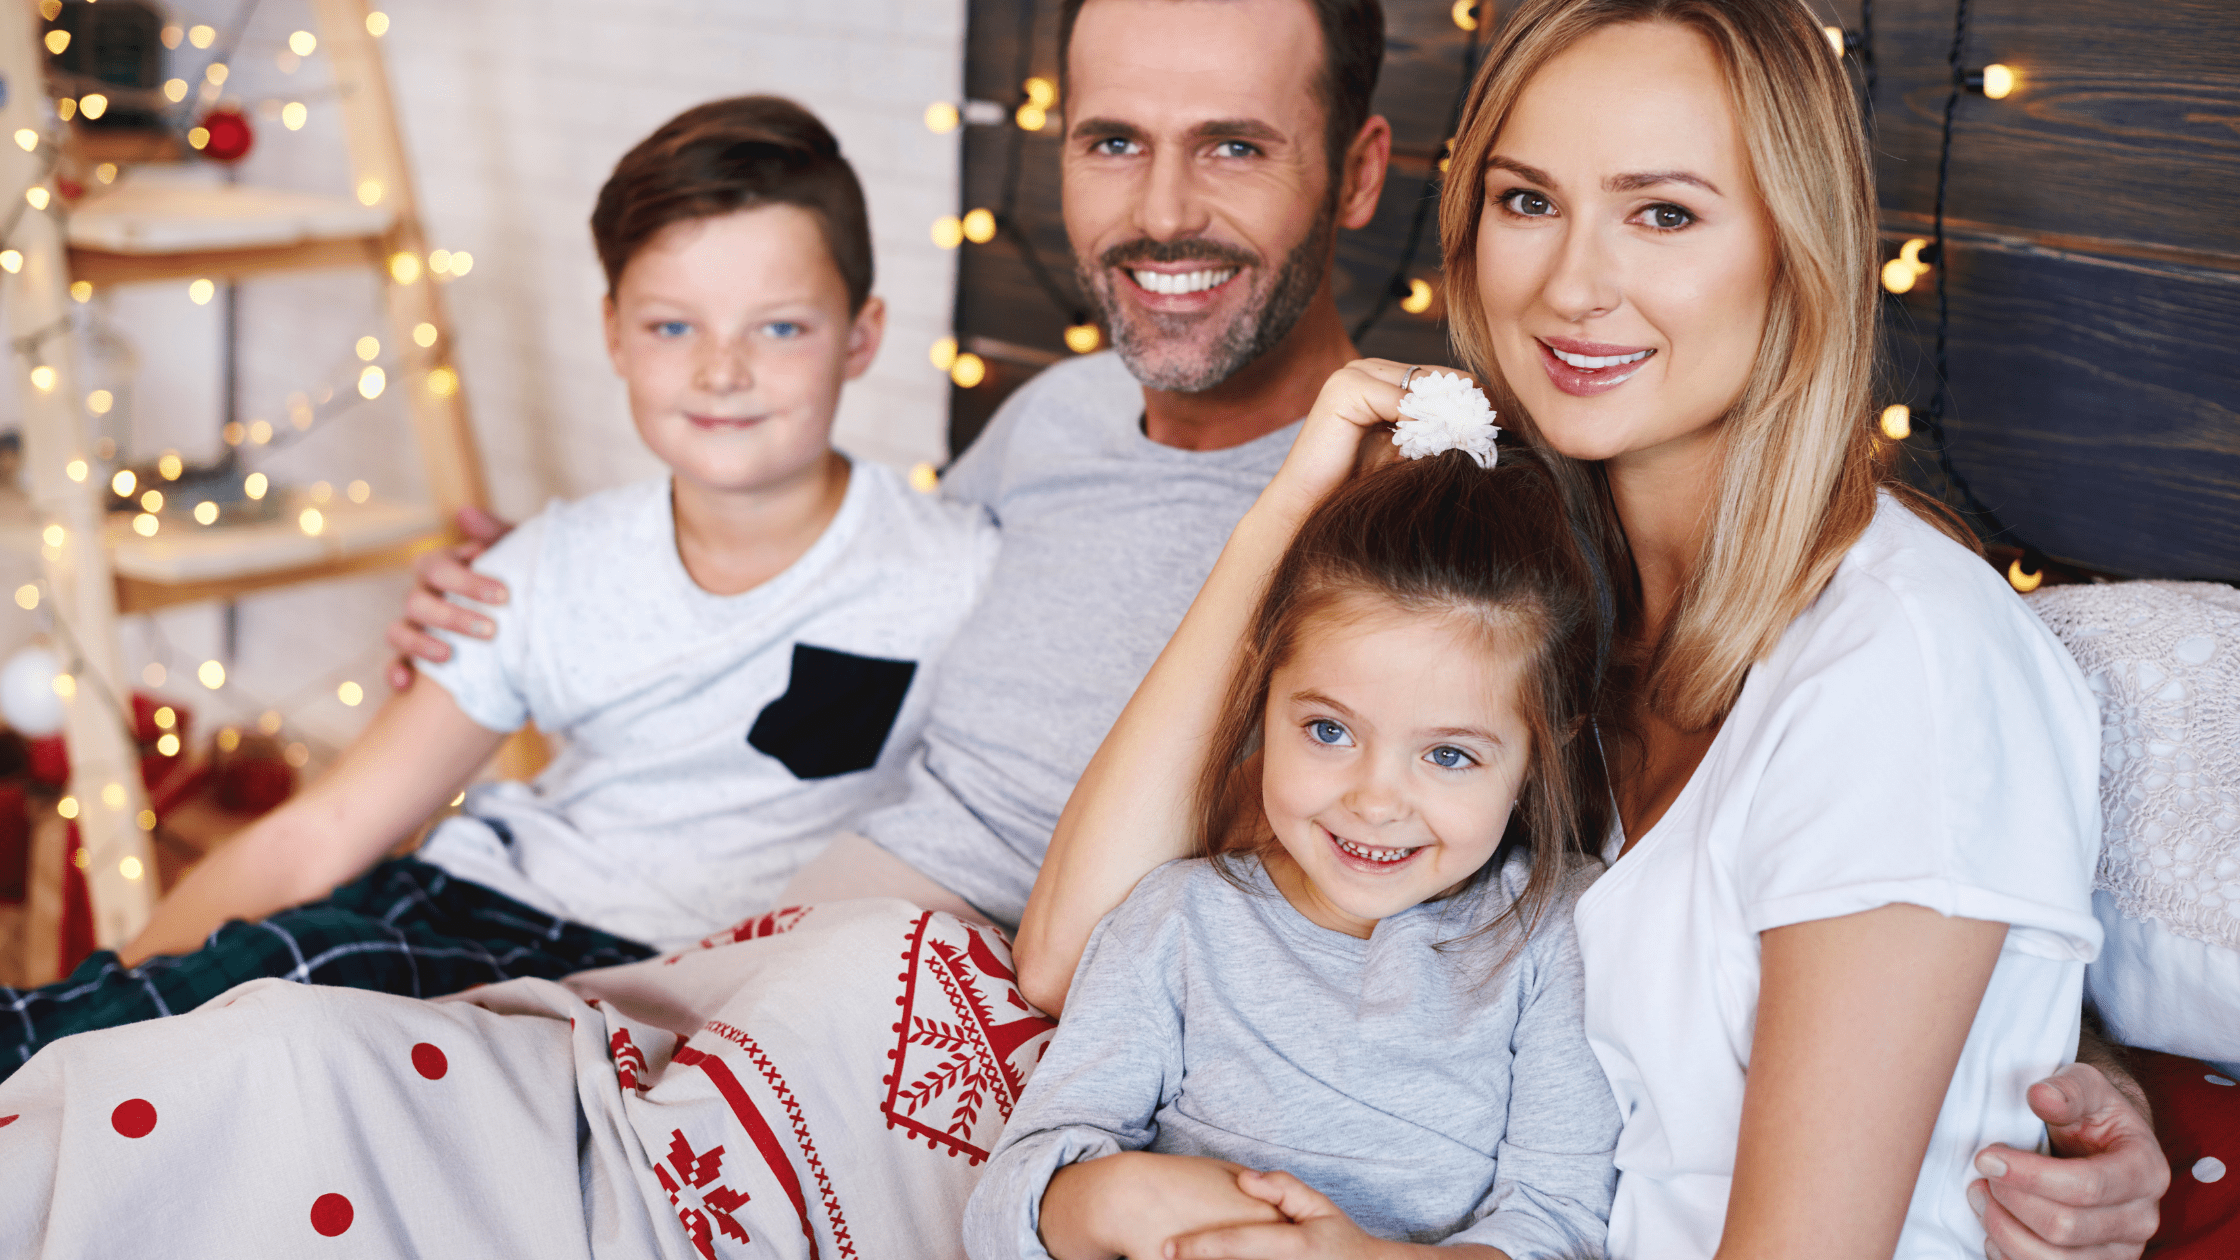 3 Tips for Having a More Intentional Christmas